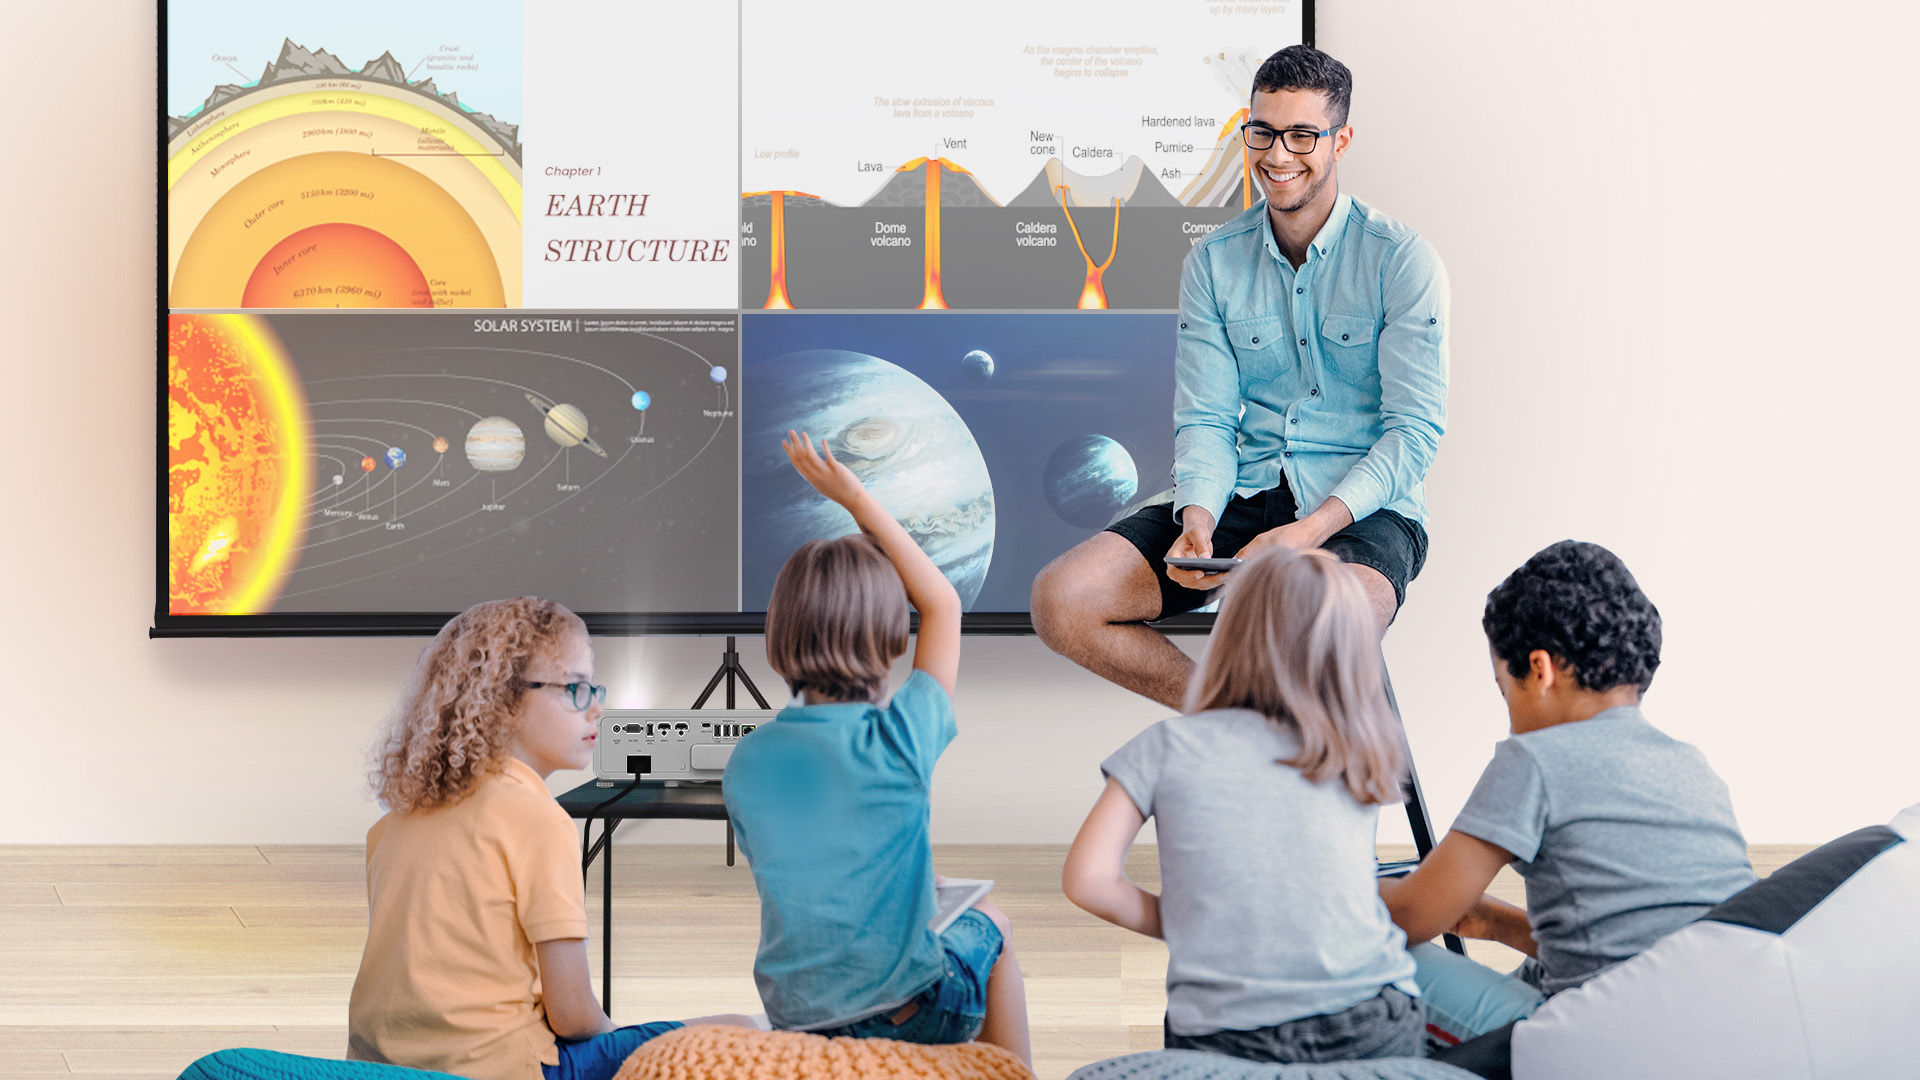 What is a Flipped classroom? The Future of Learning with Interactive whiteboards